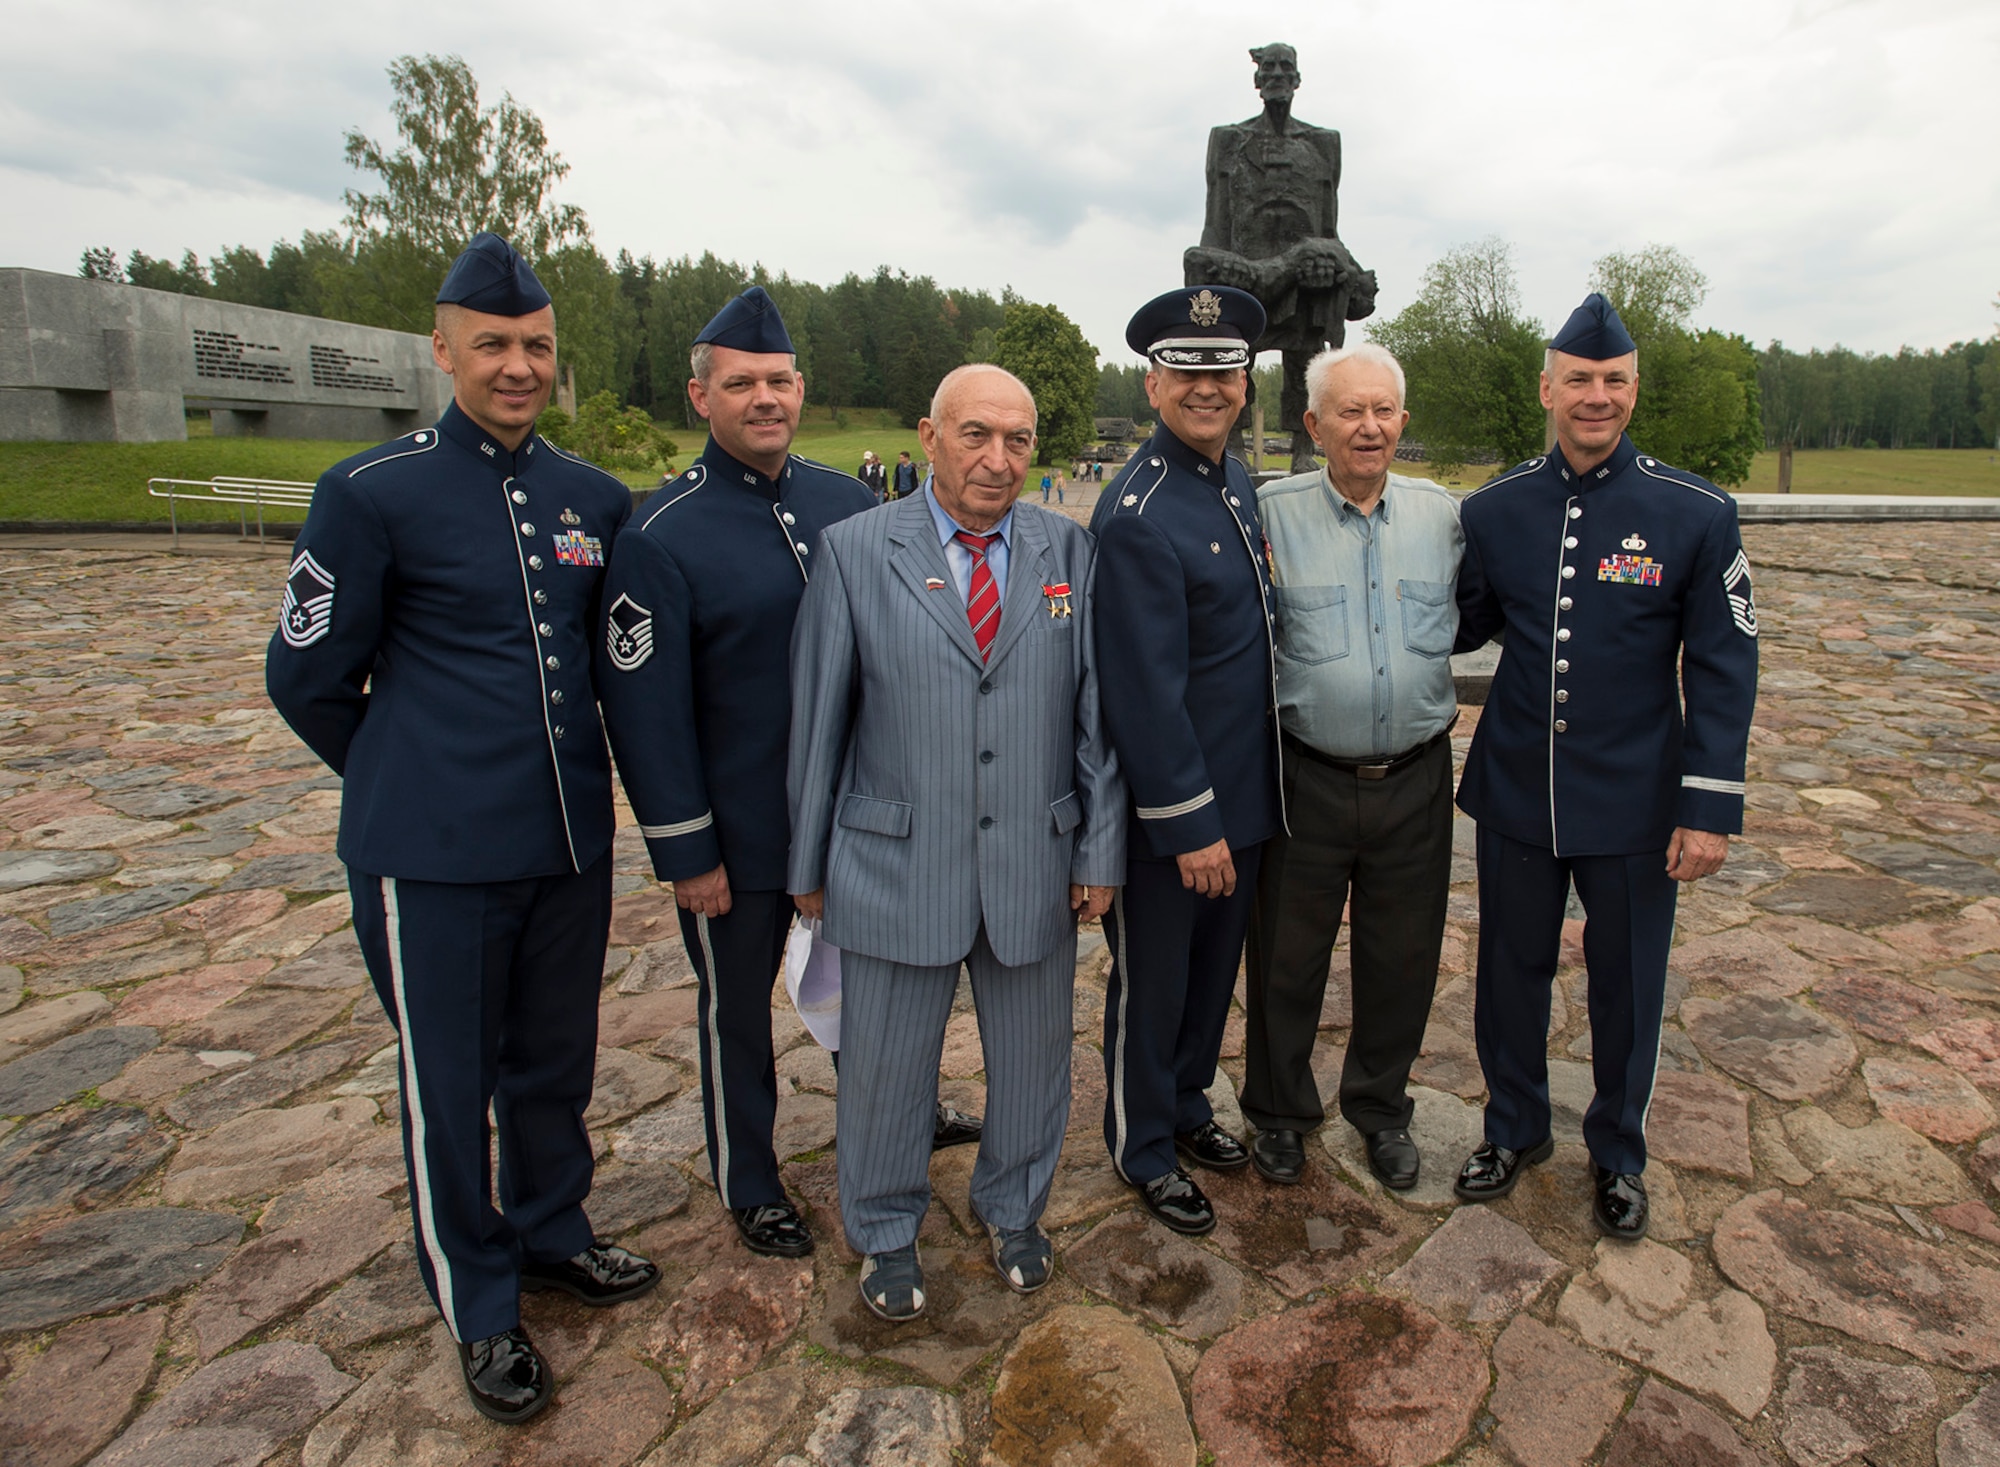 From left, U.S. Air Force Senior Master Sgt. Vladimir Tchekan, U.S. Air Forces in Europe Band’s trombone player; U.S. Air Force Master Sgt. Dave Dell, USAFE Band trumpet player; Vladimir Yarygin, former submariner for the Soviet Union; Lt. Col. Mike Mench, USAFE Band commander; Grigory, former Air Force wing commander for the Soviet Union; and Chief Master Sgt. Mark Burditt, USAFE Band chief enlisted manager, stand for a photograph in front of the “Unbowed Man” statue June 20, 2016, in Khatyn Memorial, Belarus. (U.S. Air Force photo/Technical Sgt. Paul Villanueva II)